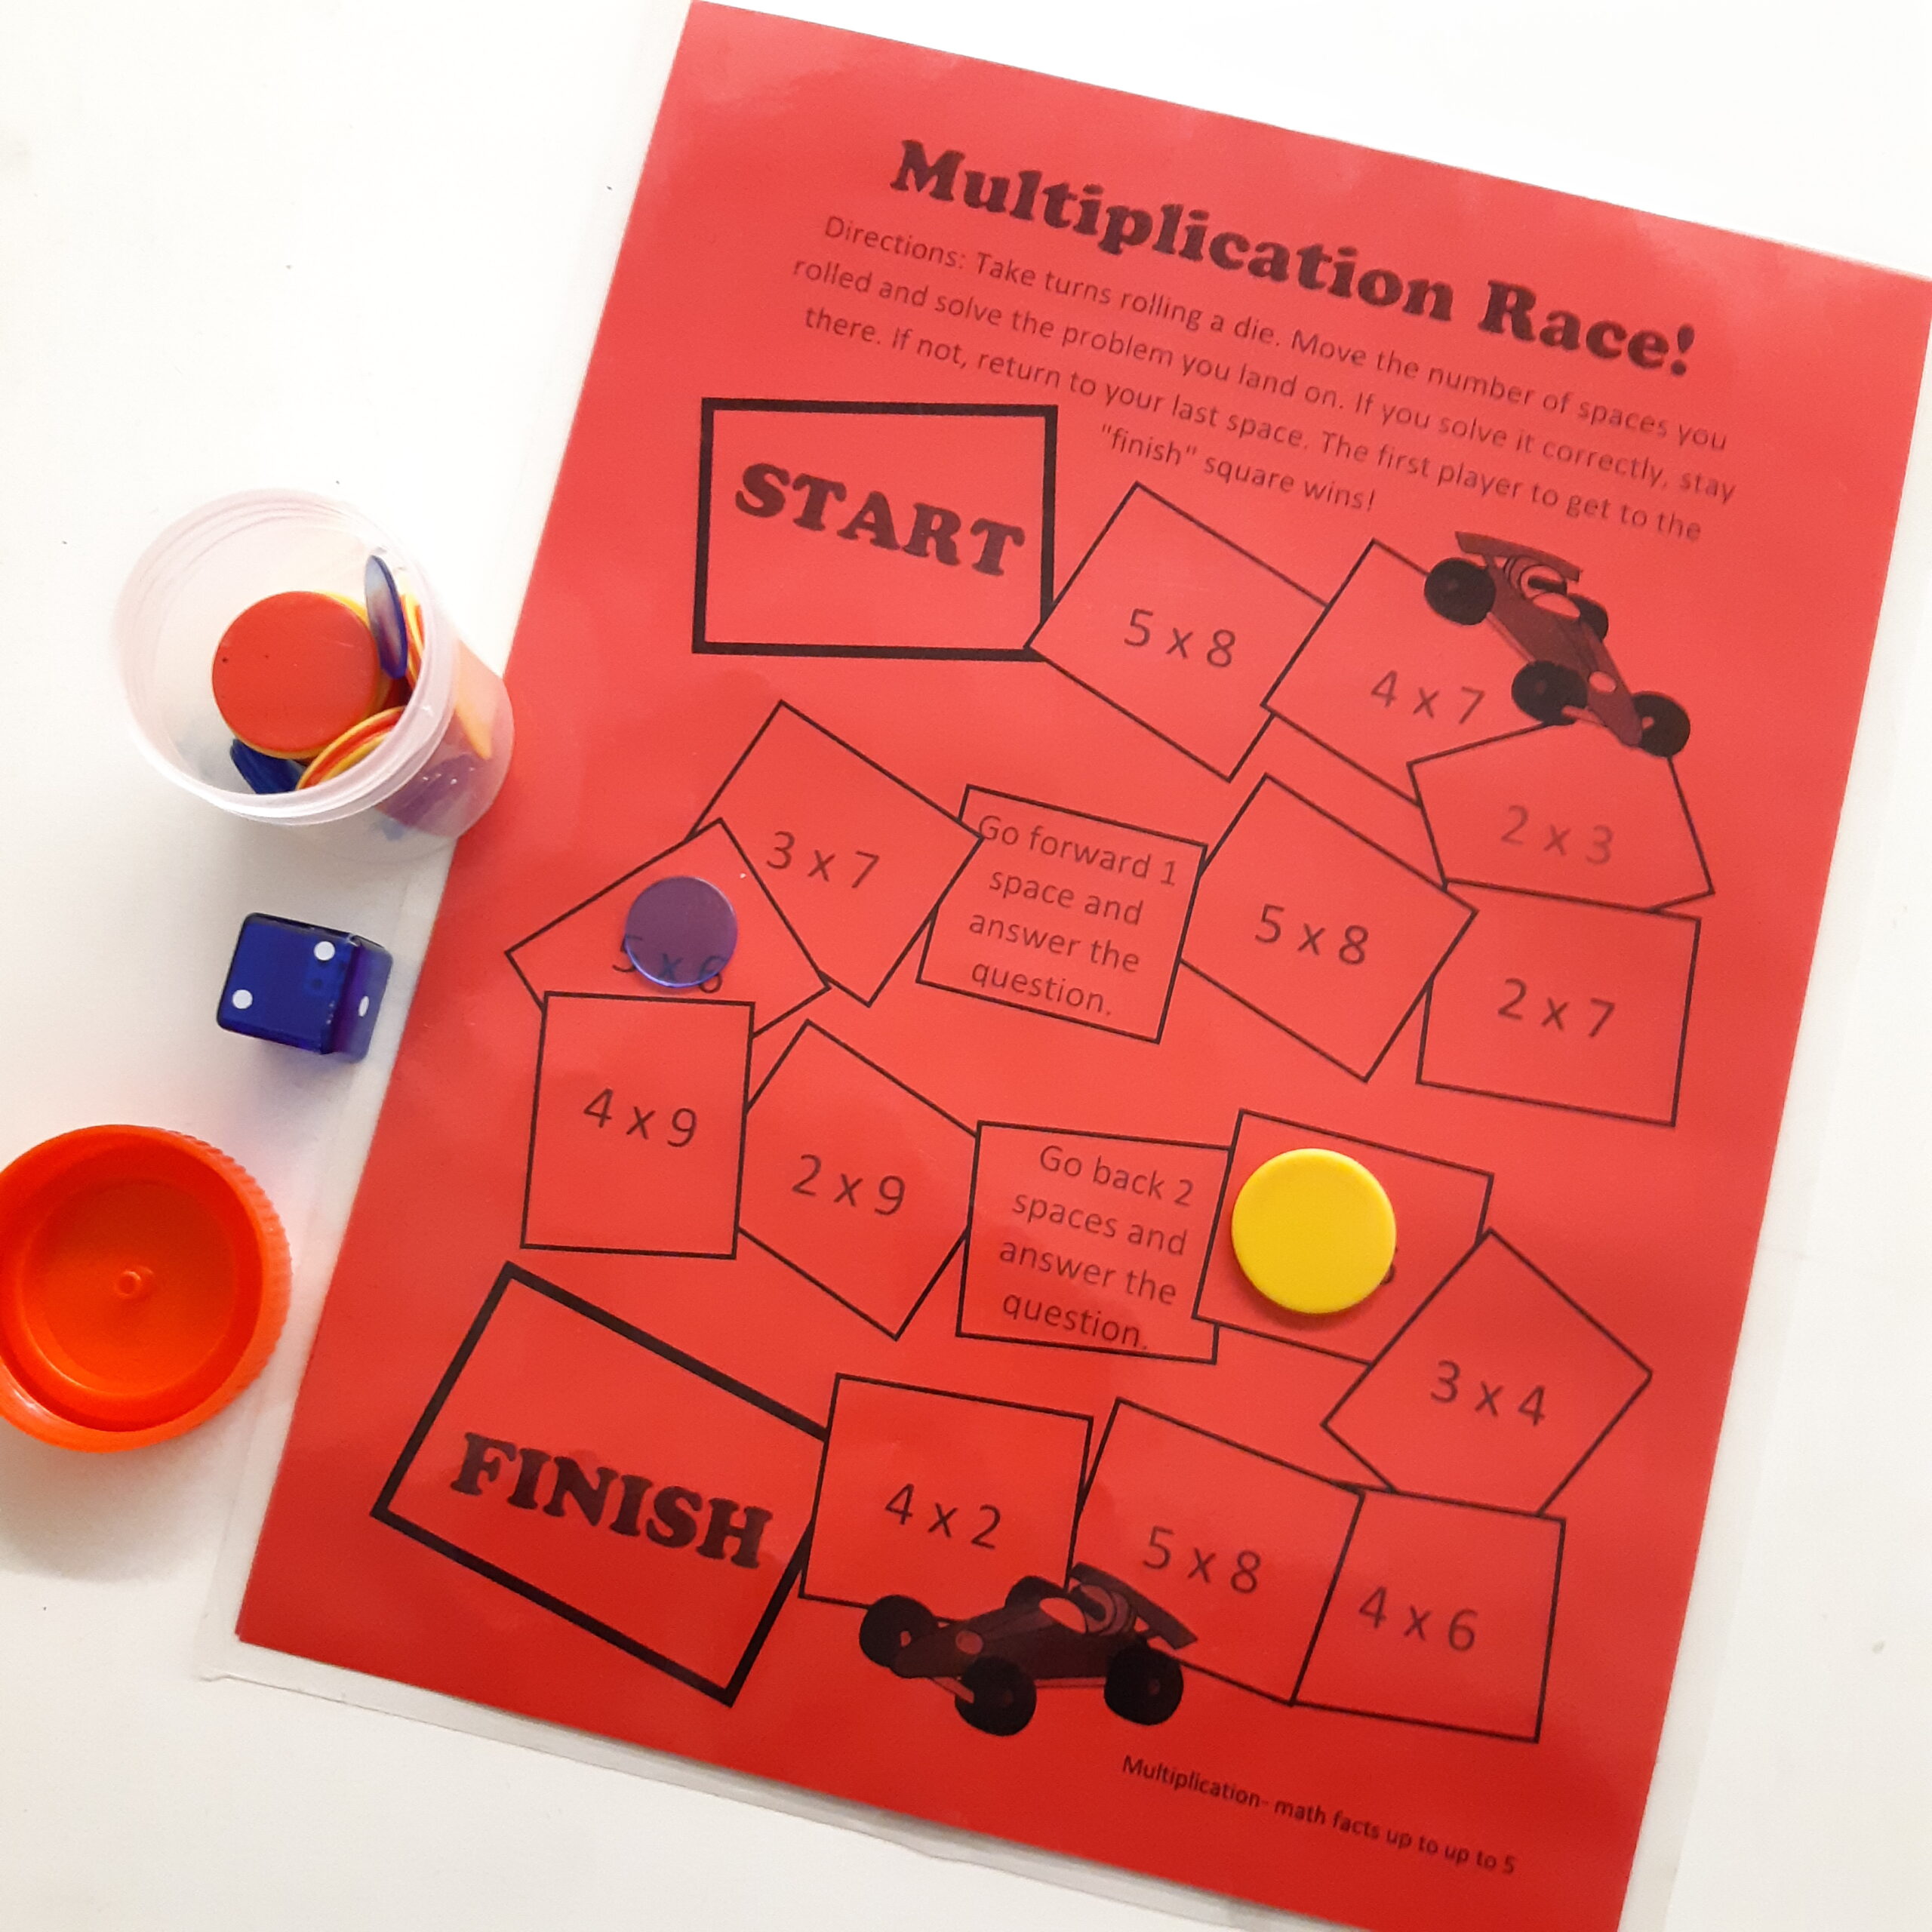 A urine sample jar with counters in it sits beside a red math game and blue die.